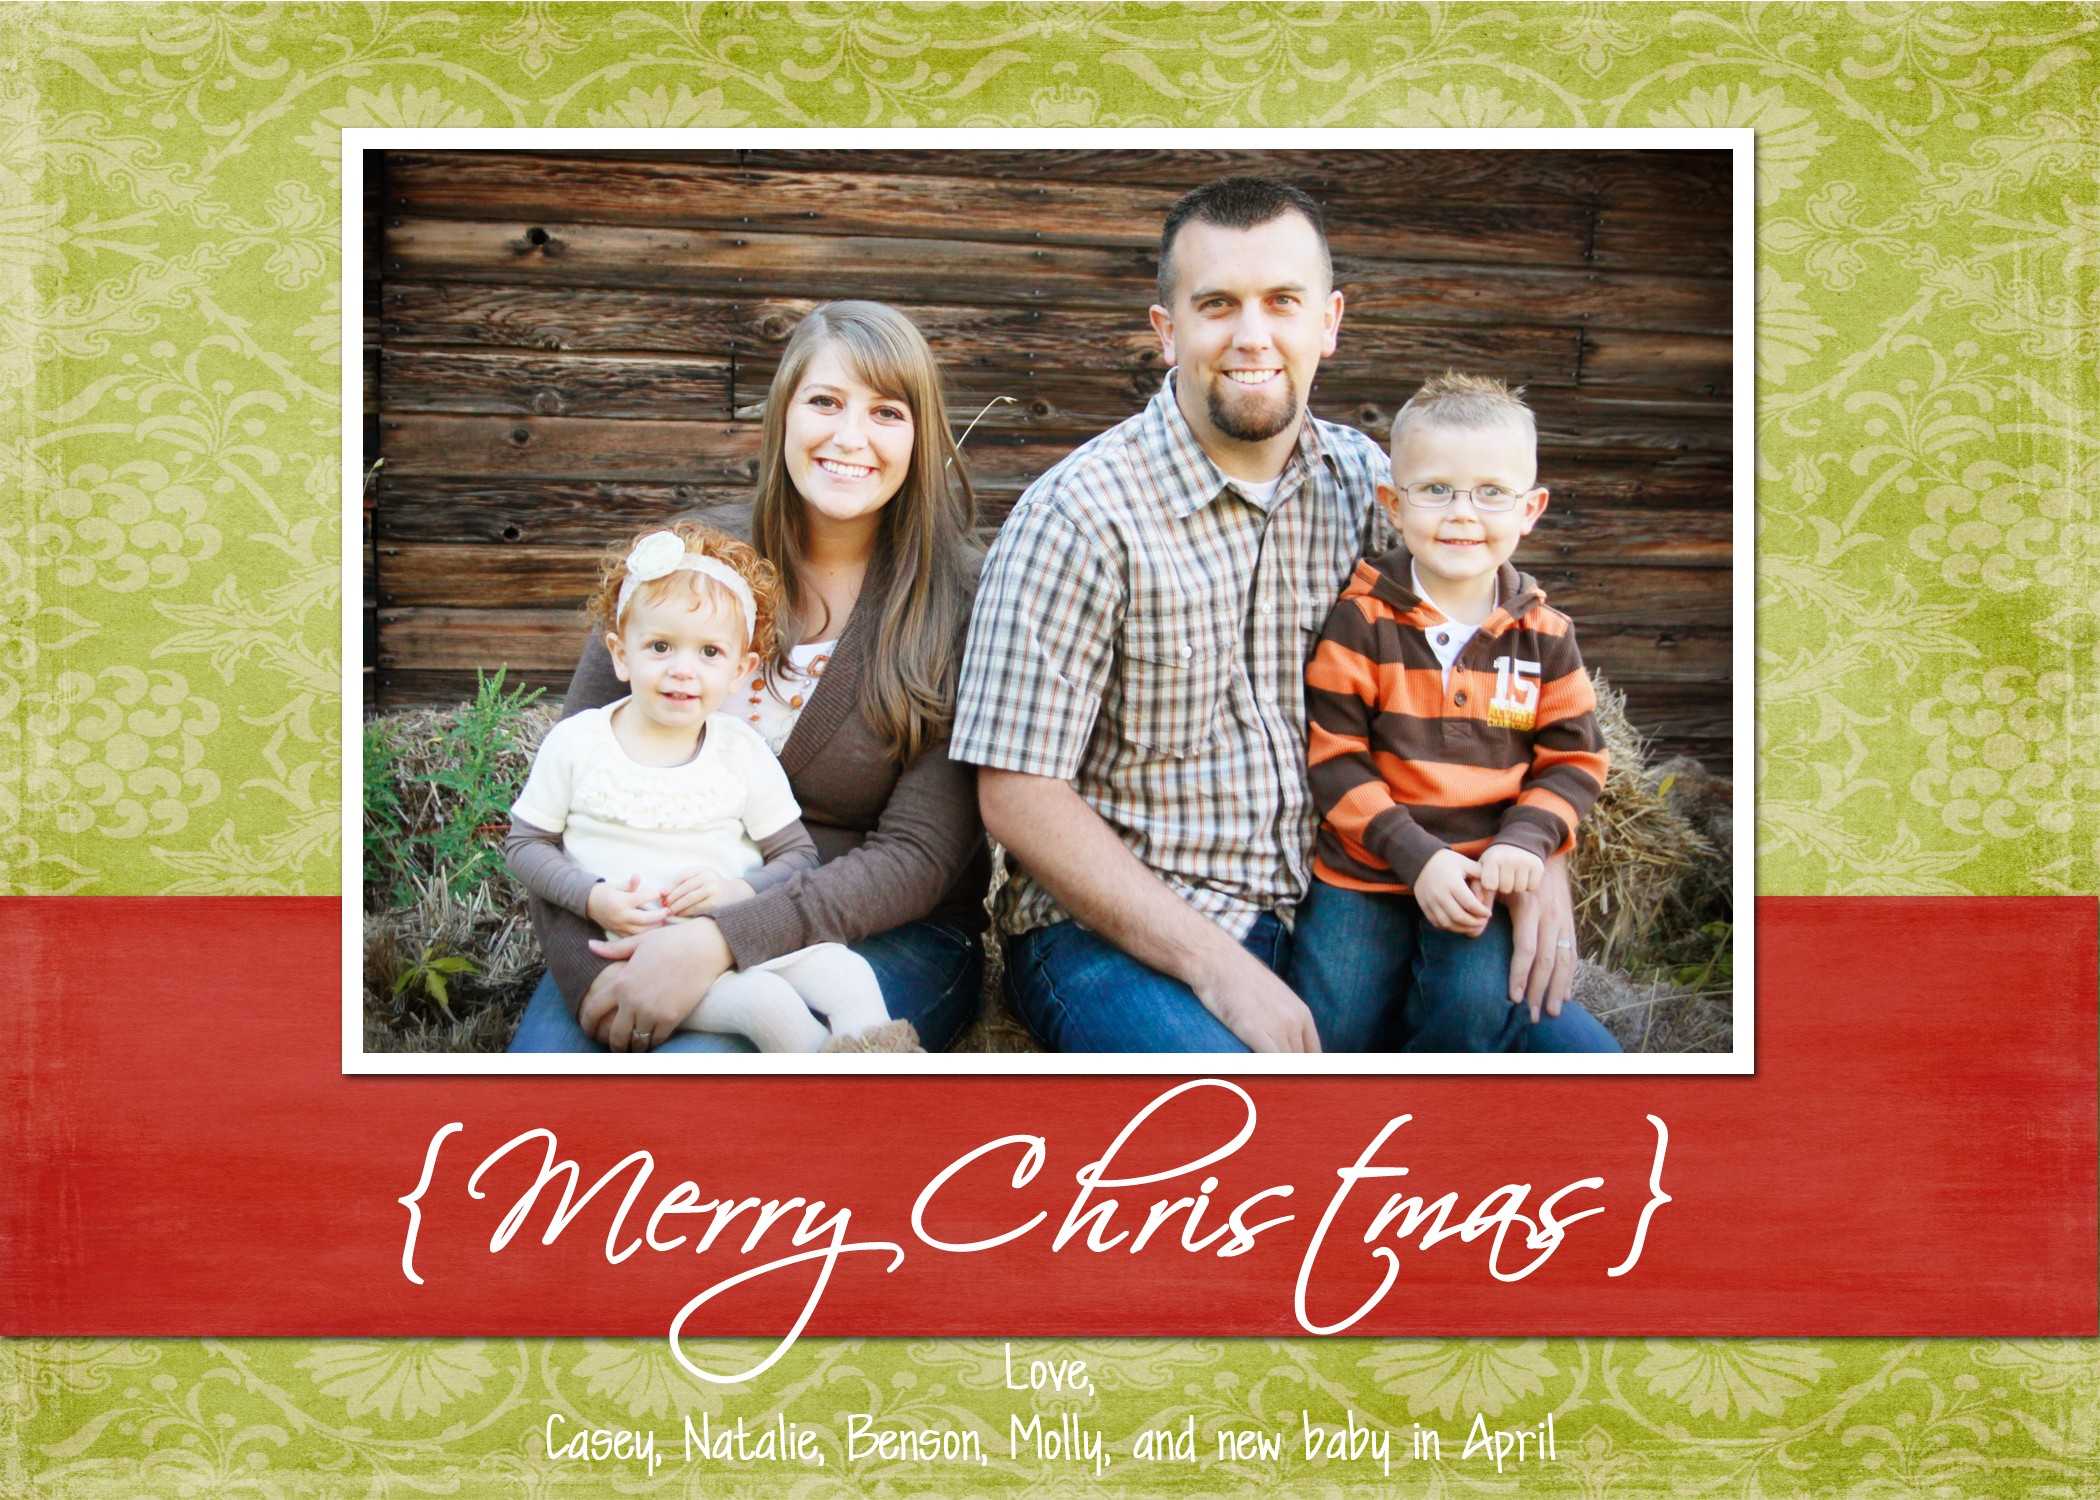 Christmas Holiday Card Templates For Photographers Photoshop With Regard To Free Photoshop Christmas Card Templates For Photographers